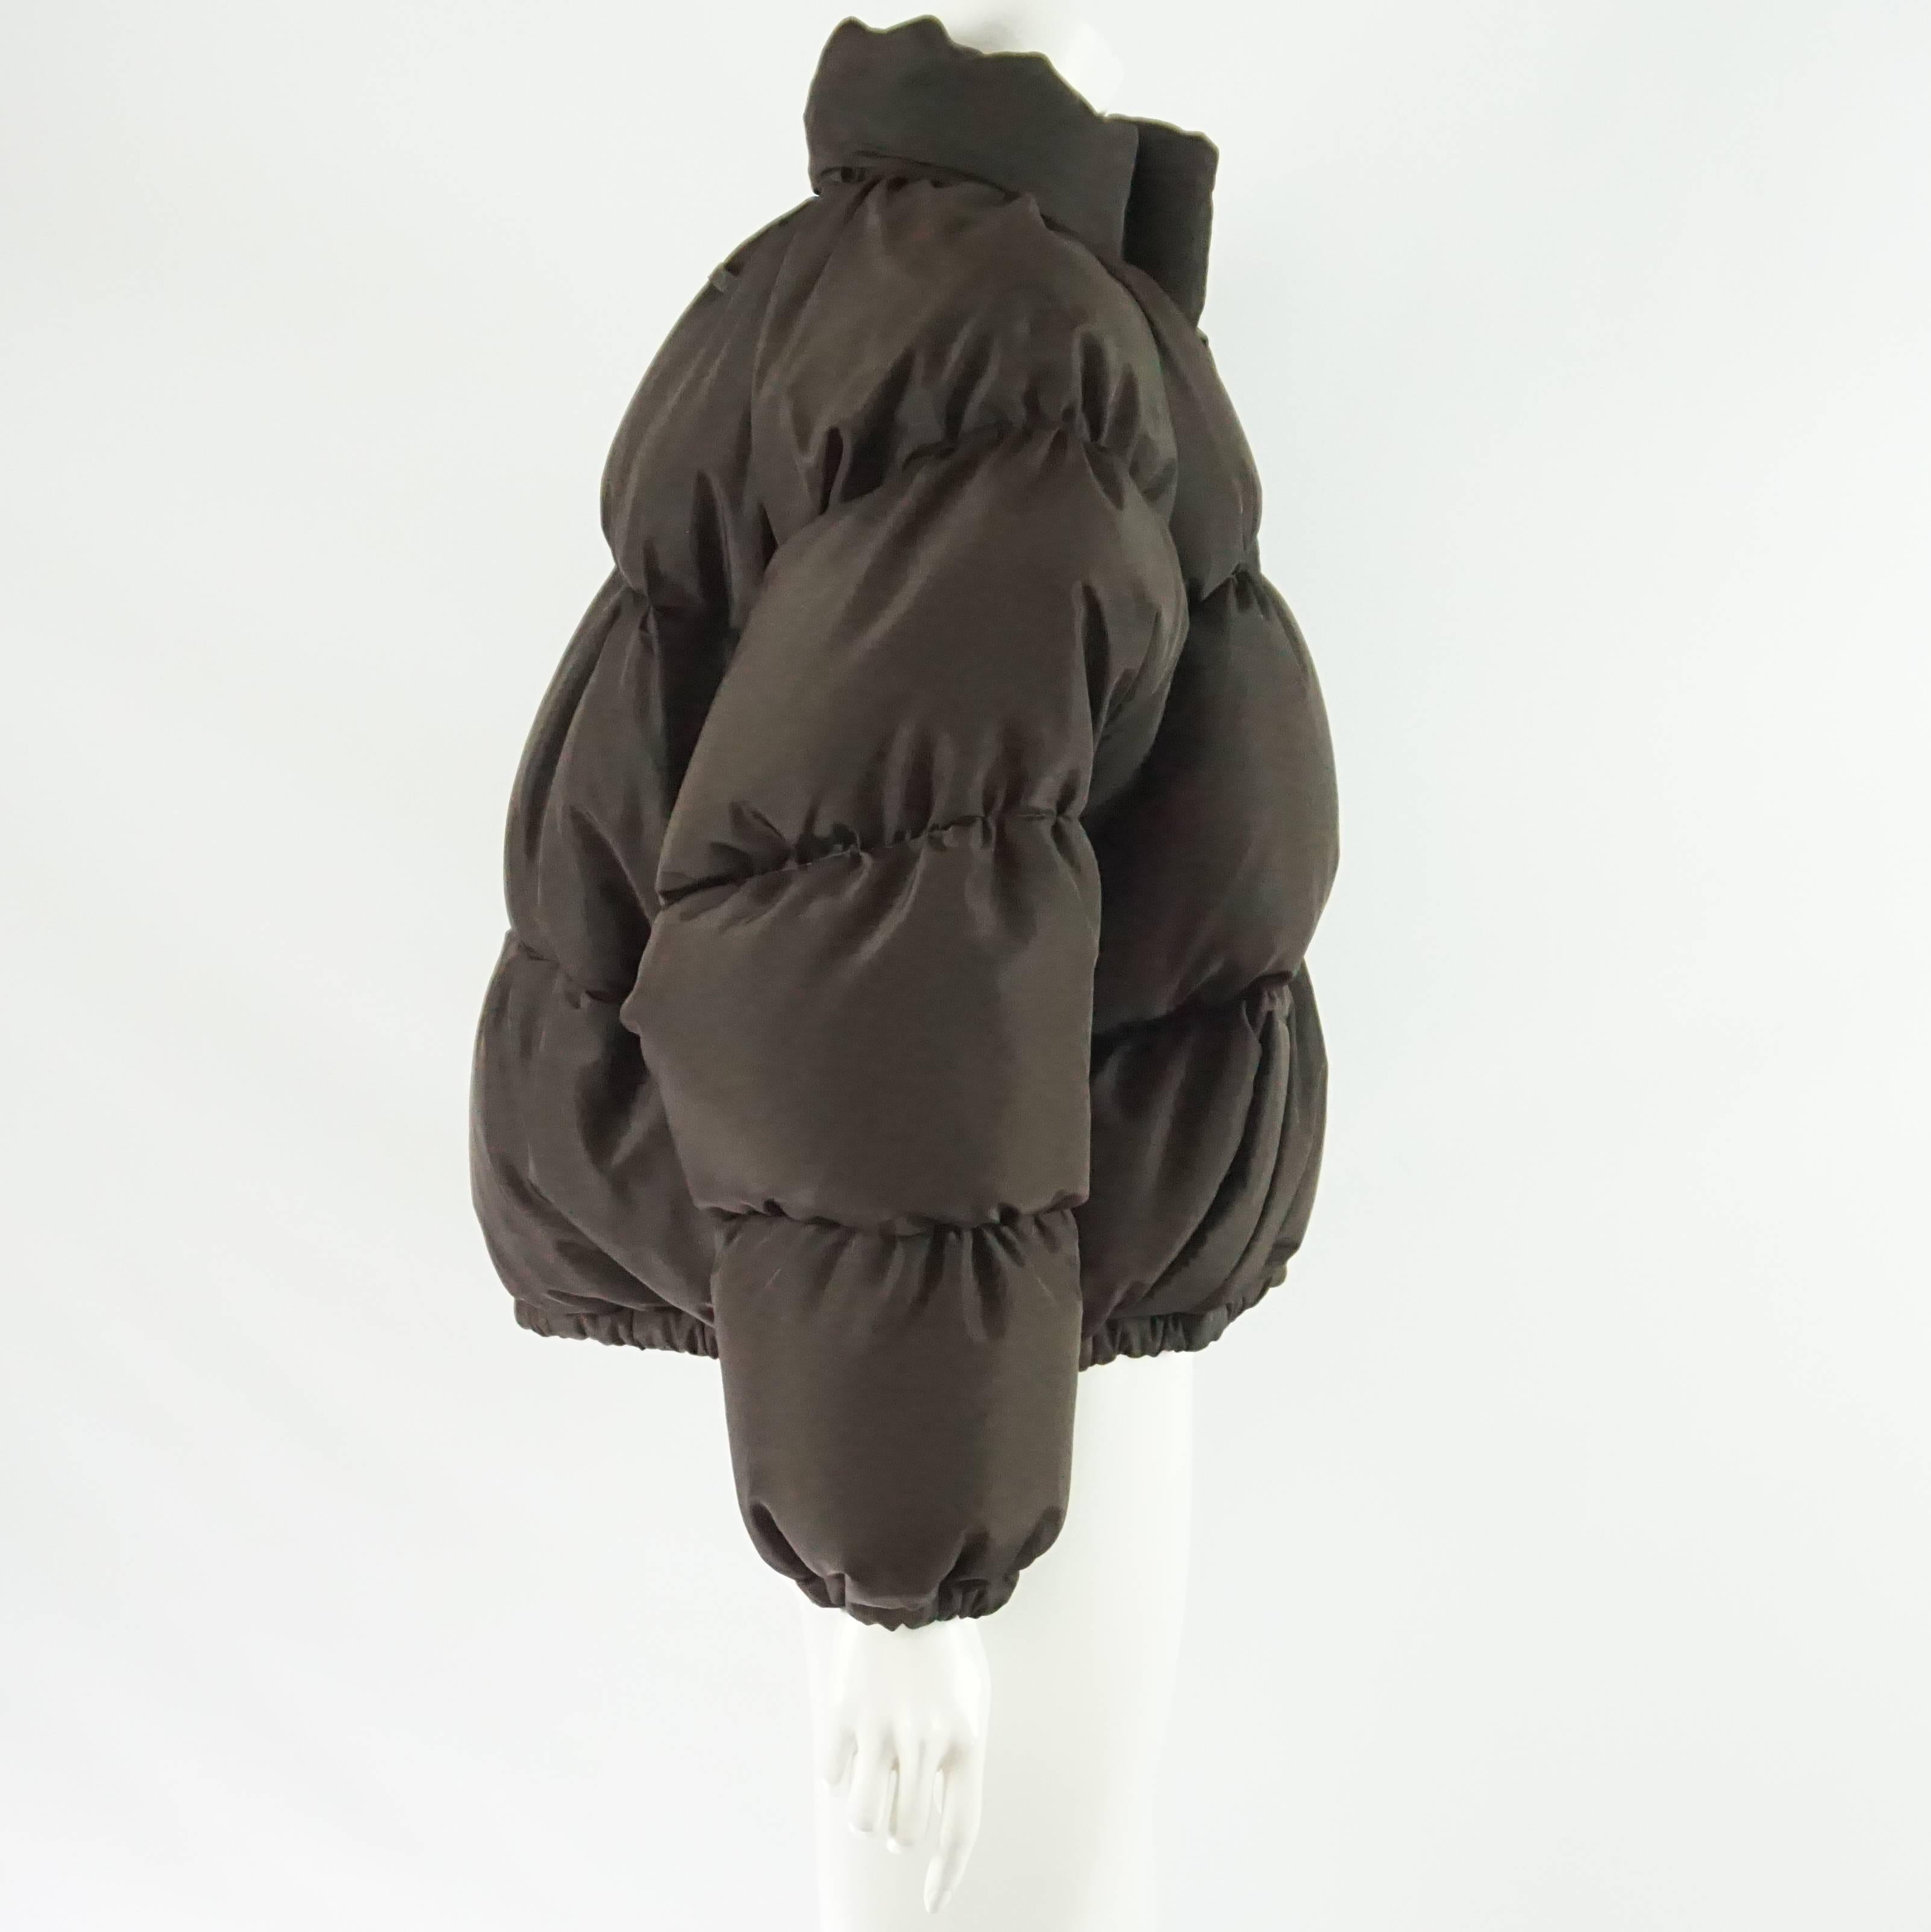 This Jean Paul Gaultier dark brown oversize puffer jacket has a detachable hood and a front zipper with 2 front pockets. The jacket is in excellent condition with minimal wear. It is a size M but can also fit a L due to its size. Circa